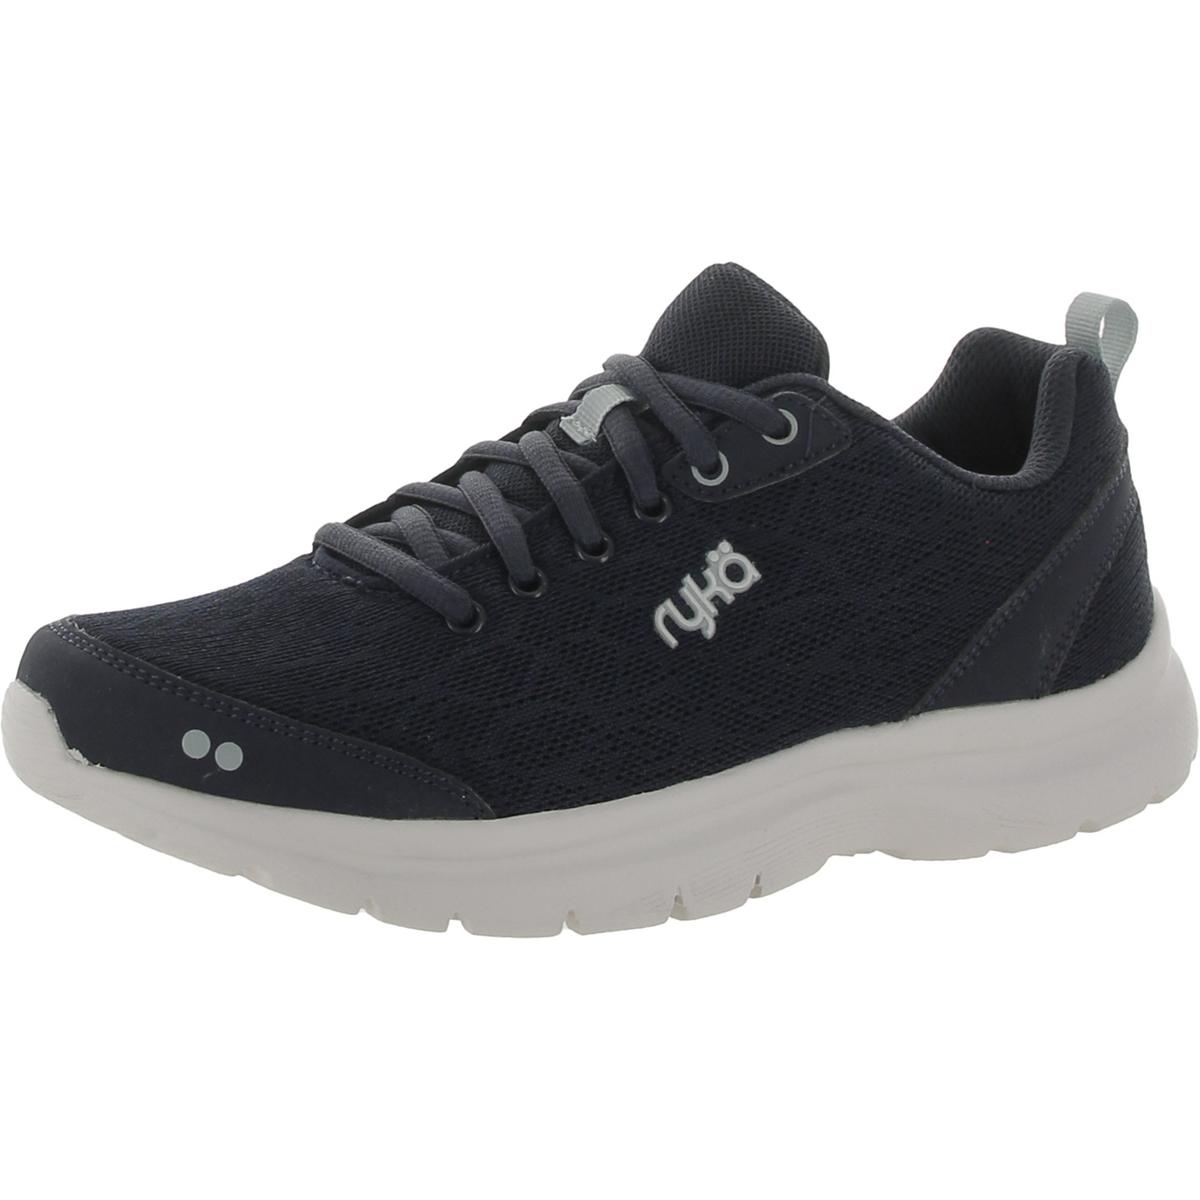 Ryka Wendy Womens Walking Fitness Athletic and Training Shoes